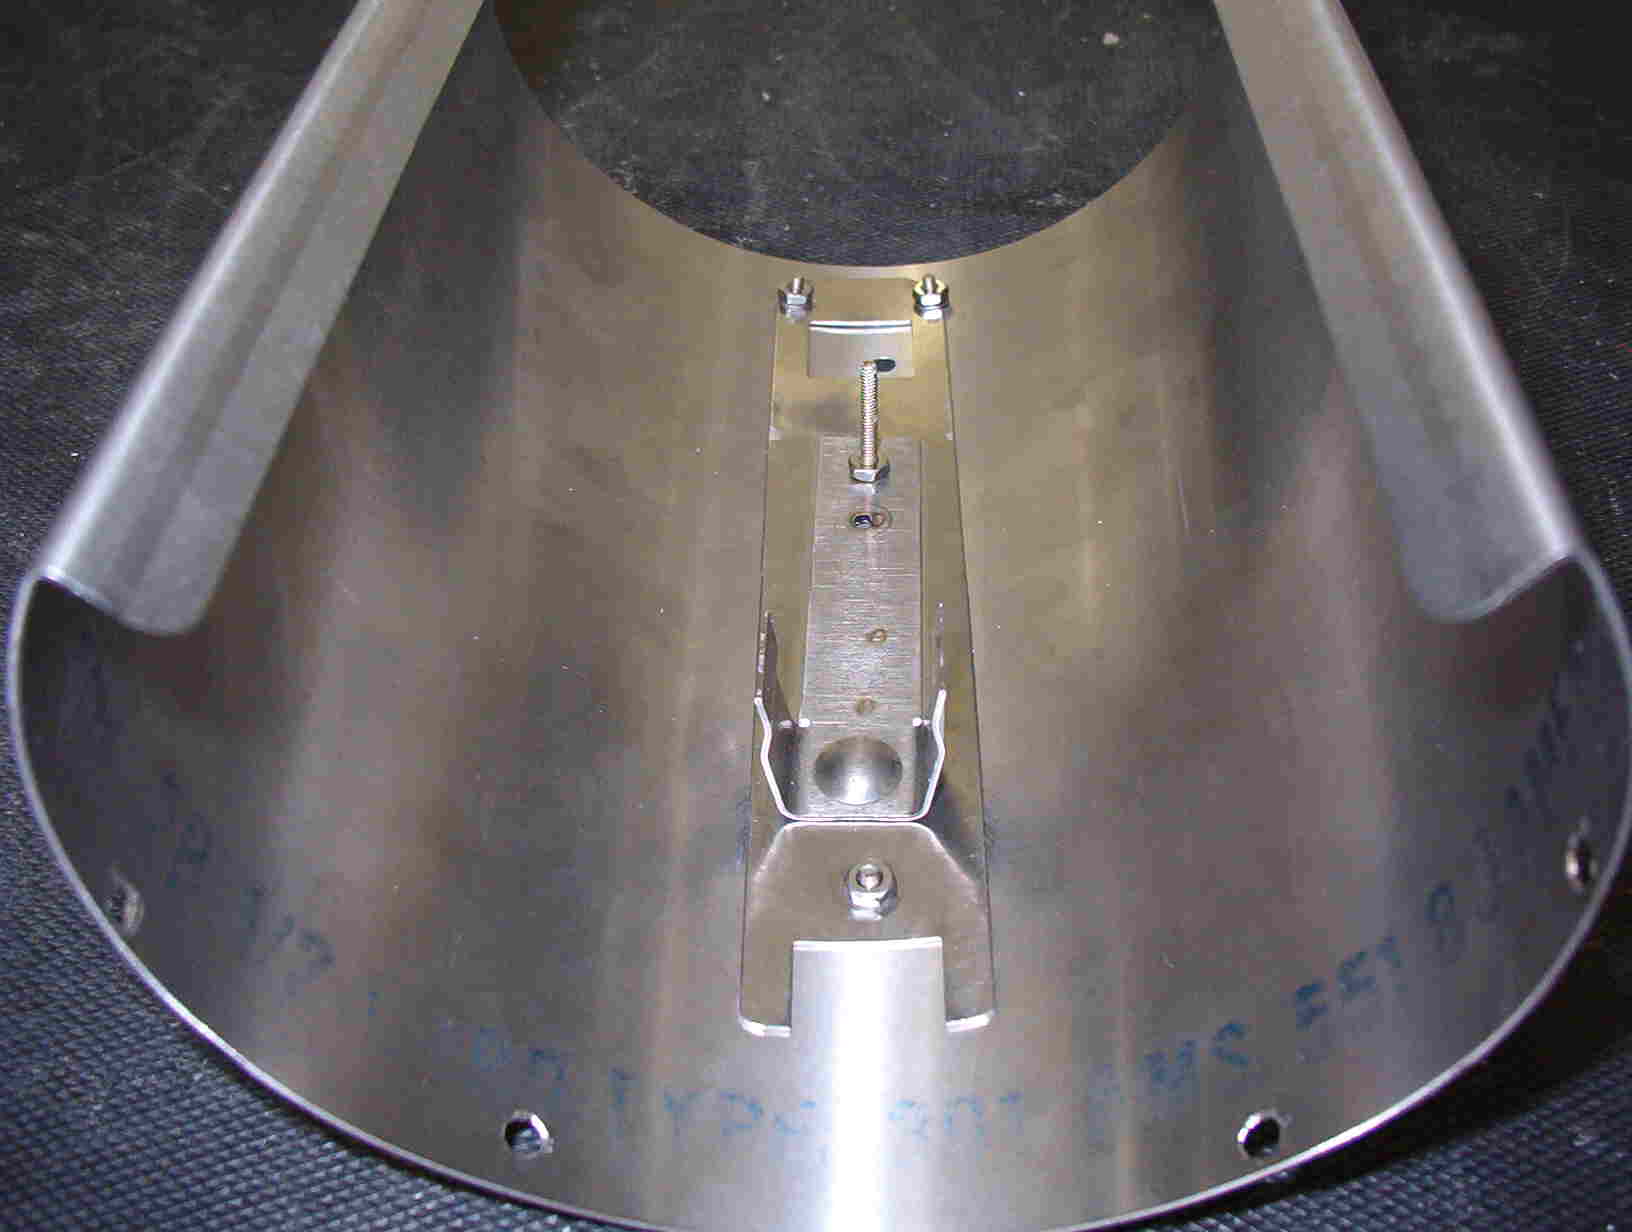 Compressible ring with mounting hardware